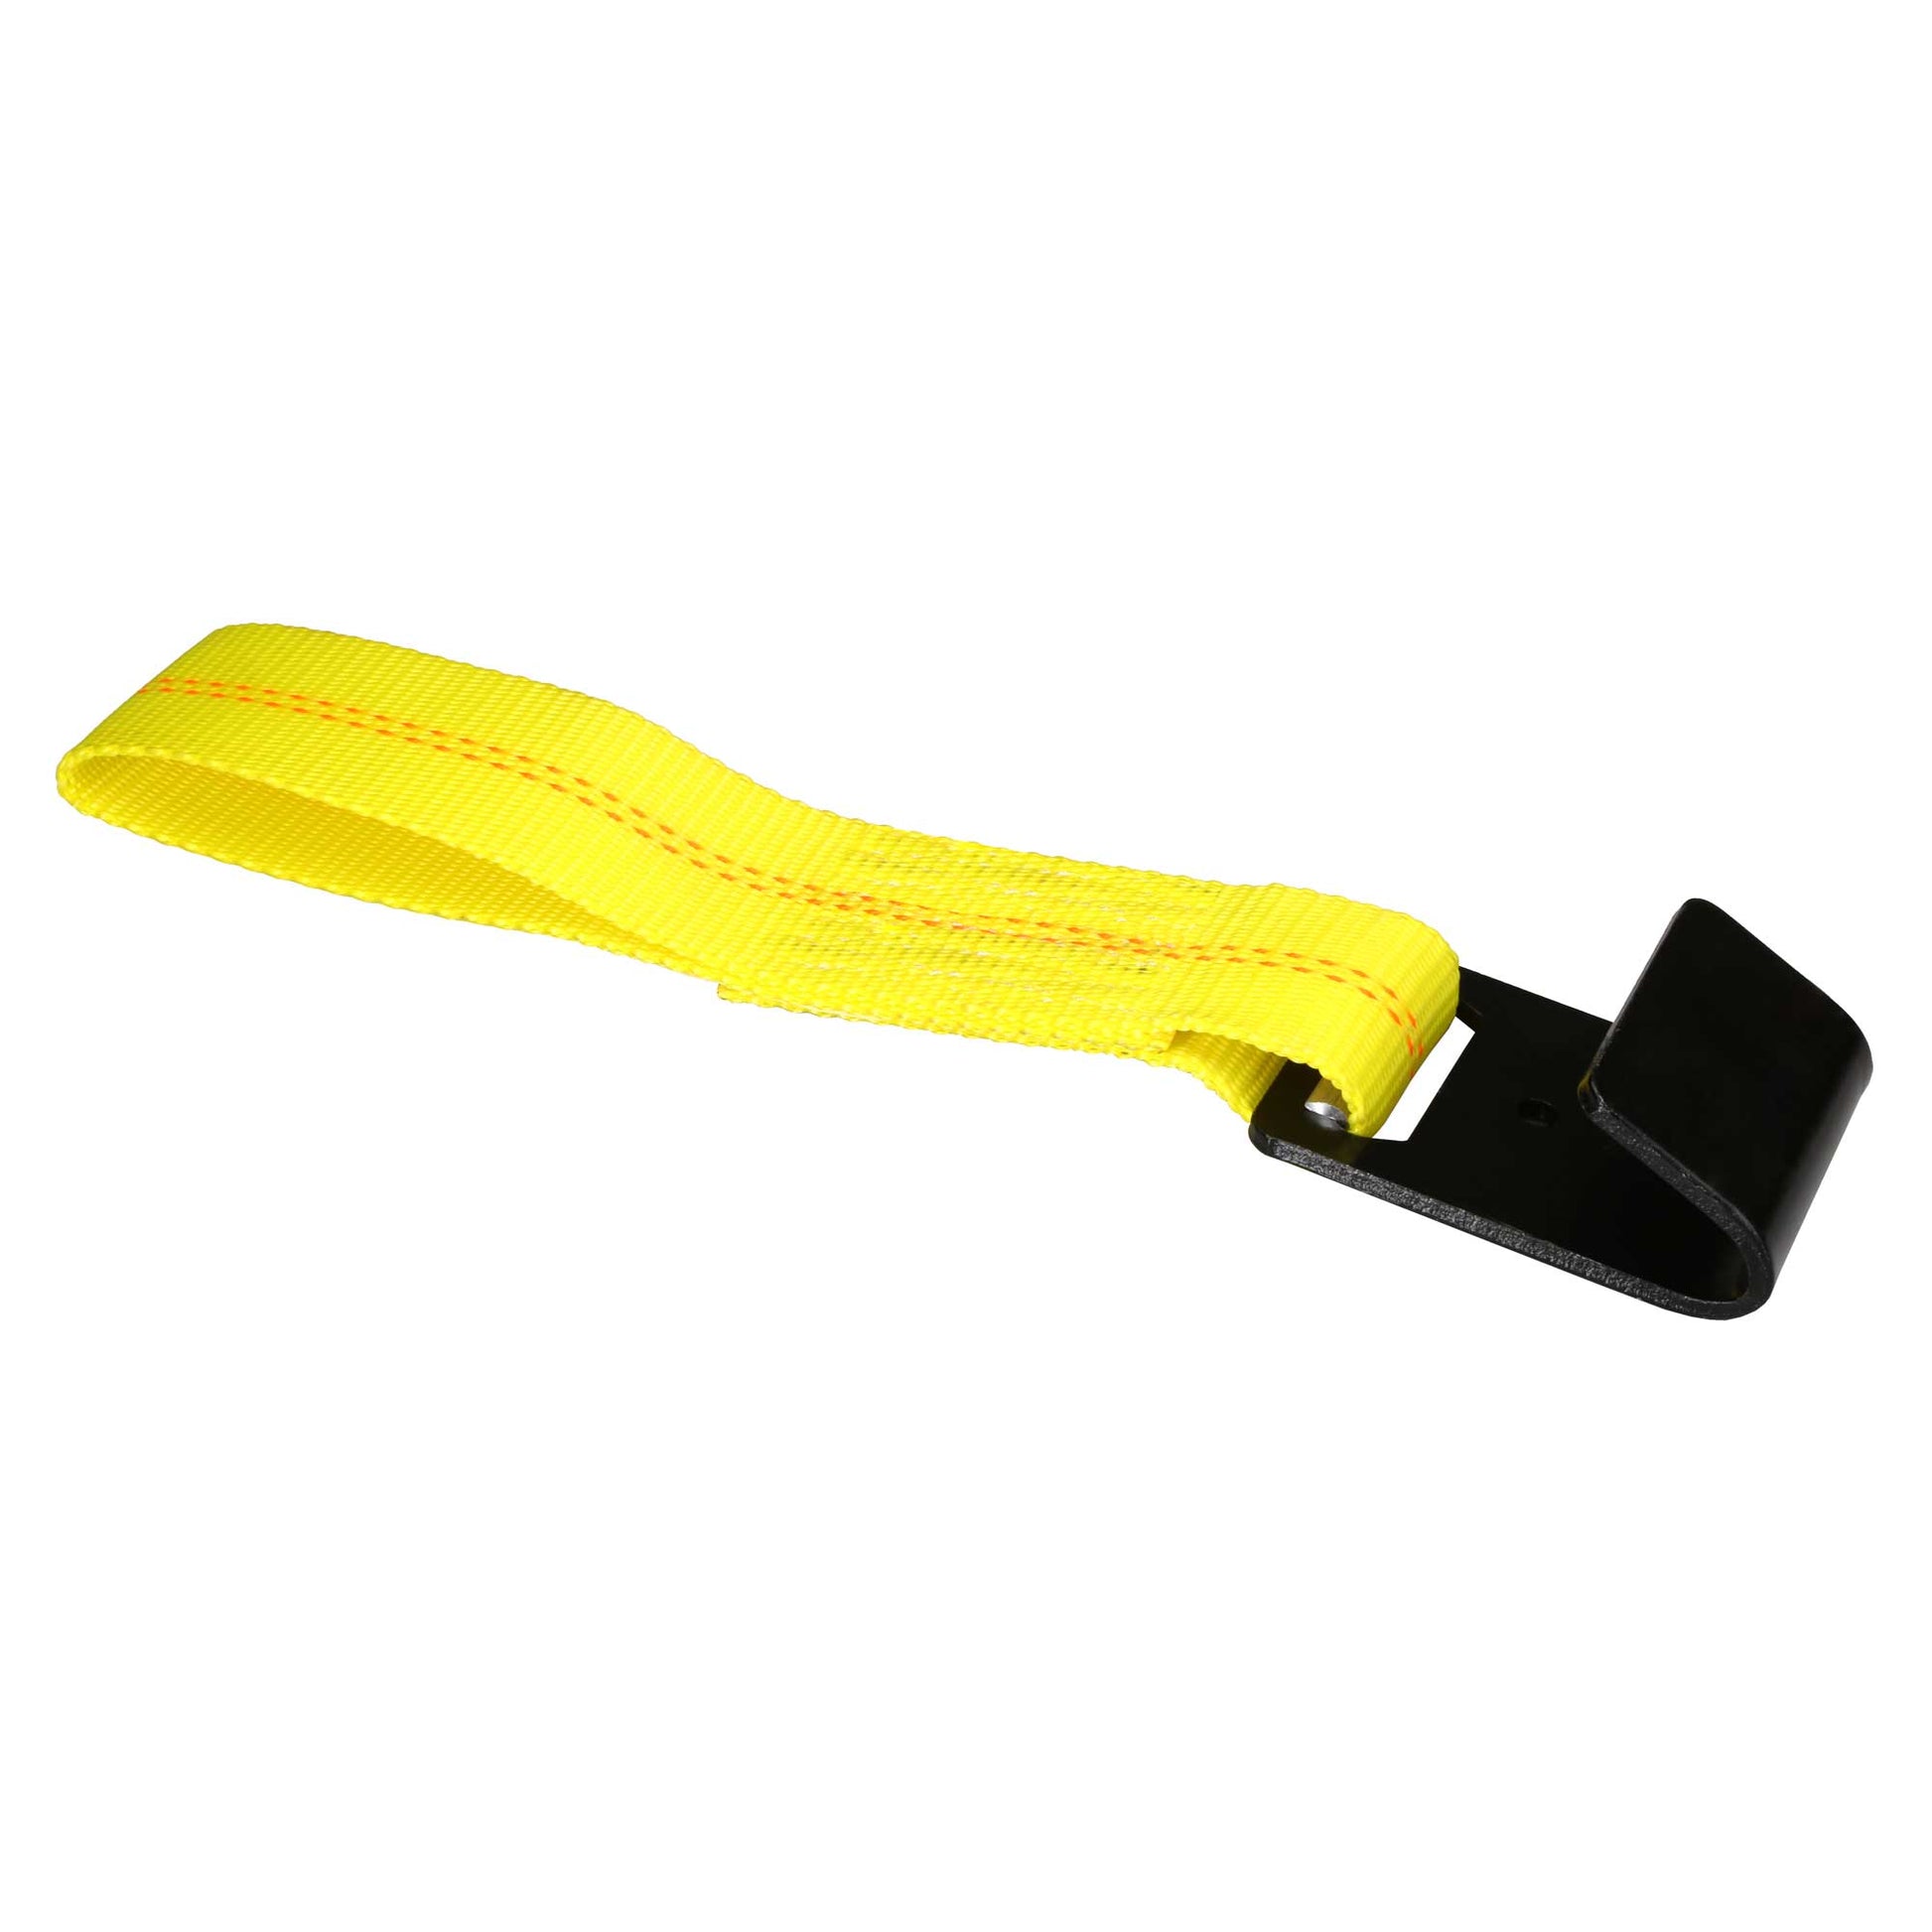 11" replacement for ratchet strap -  2" replacement flat hook ratchet strap - no ratchet